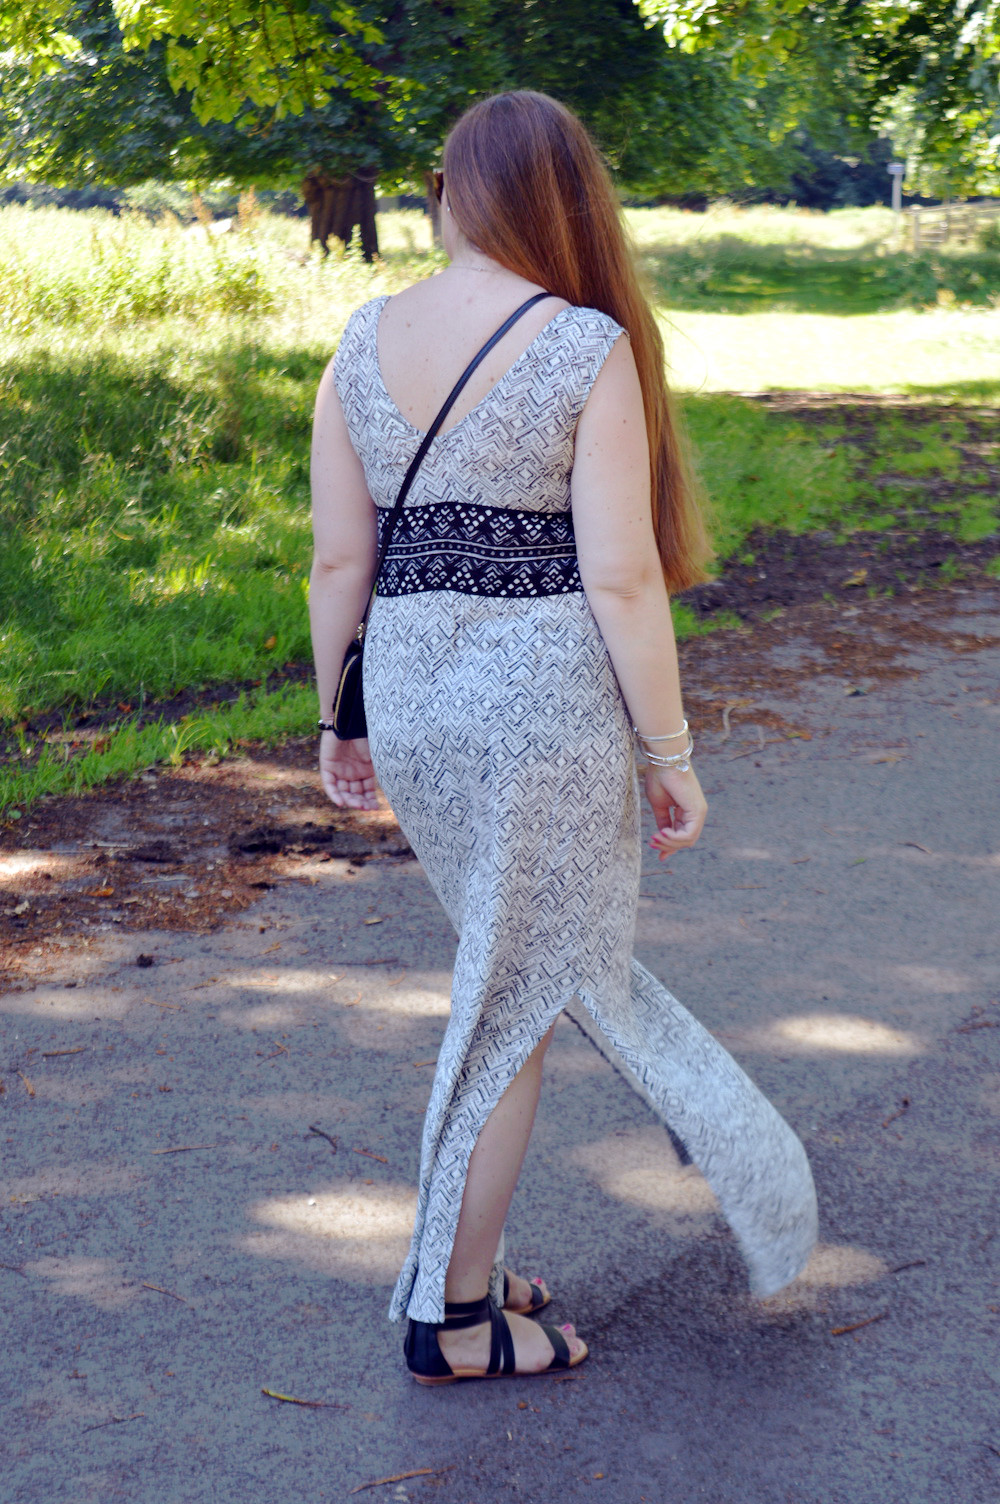 Black and white maxi dress outfit